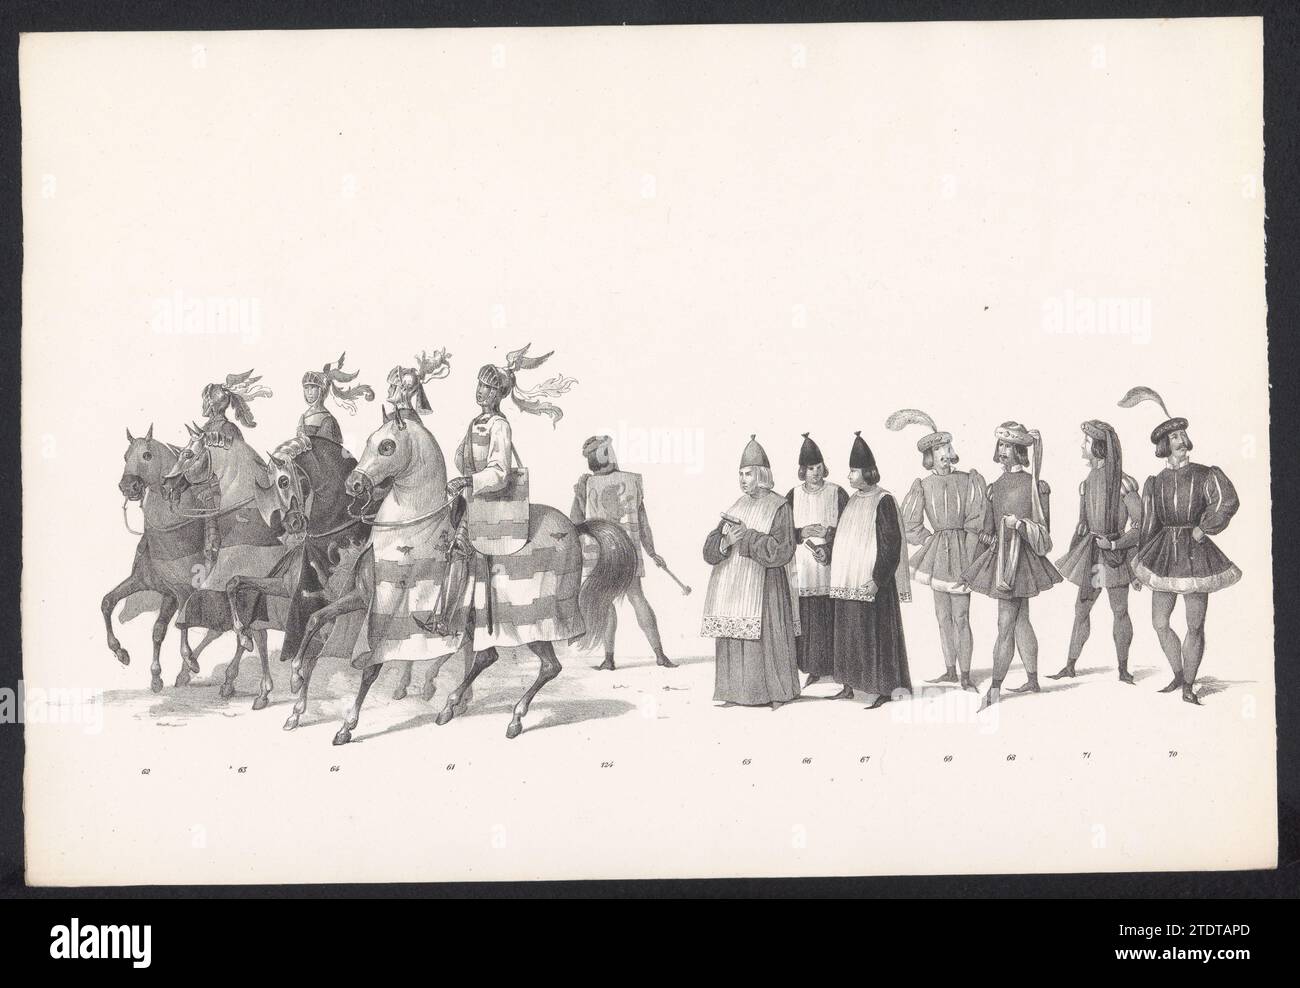 Maskerade by students from the Leidse Hogeschool, 1840 (plate 10), 1840 Historically costumed parade of the students of the Hogeschool van Leiden on February 8, 1840. The parade depicts the entry of Duke Jan van Beieren in Leiden on August 18, 1420. Tenth plate in a series of nineteen unnumbered plates, with the groups numbered 62-70 . Leiden paper Historically costumed parade of the students of the Hogeschool van Leiden on February 8, 1840. The parade depicts the entry of Duke Jan van Beieren in Leiden on August 18, 1420. Tenth plate in a series of nineteen unnumbered plates, with the groups Stock Photo